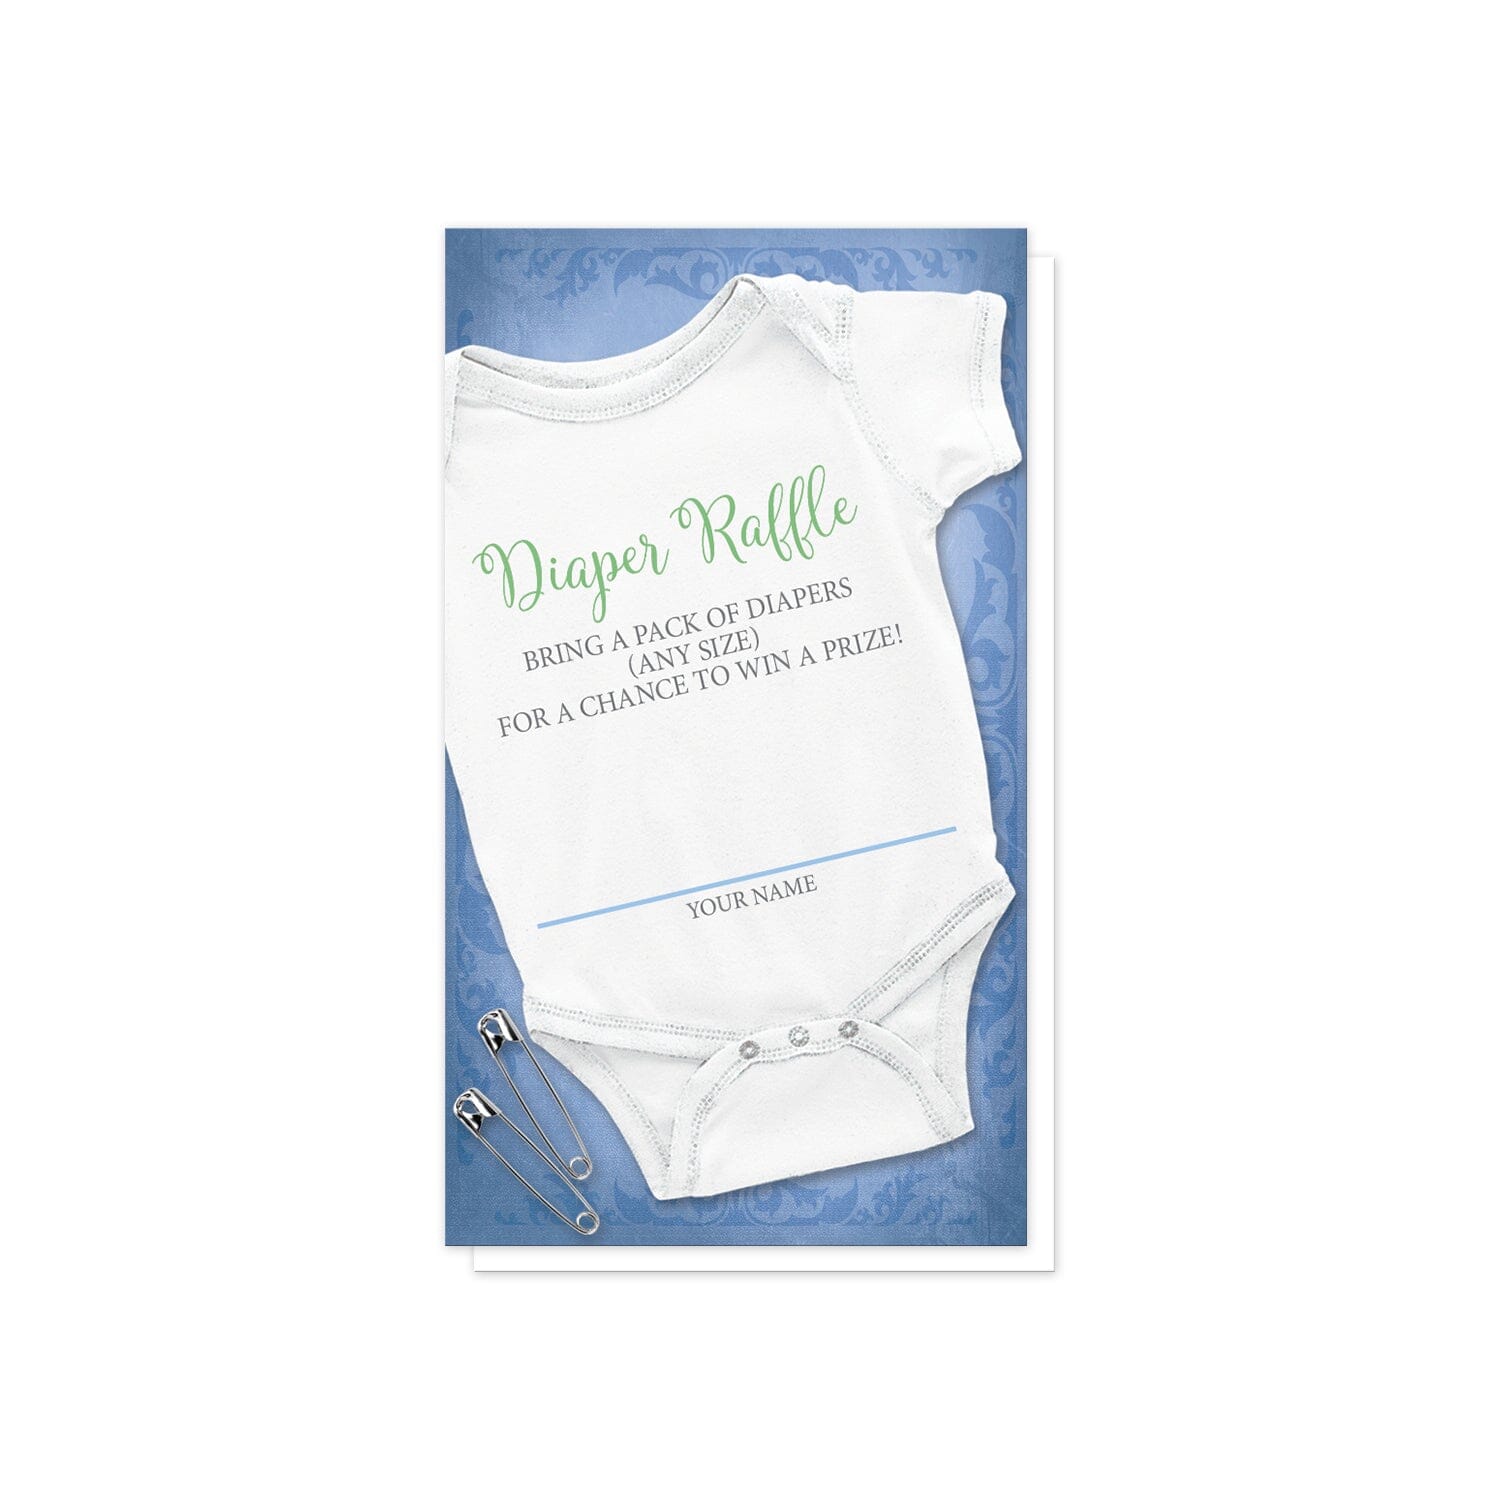 Baby Bodysuit and Safety Pins Blue Diaper Raffle Cards at Artistically Invited. Uniquely designed baby bodysuit and safety pins blue diaper raffle cards with an illustration of a white infant bodysuit and two safety pin over a blue flourish background. Your diaper raffle details are printed in green and gray with a blue line for the name on an angle over the white baby bodysuit. 